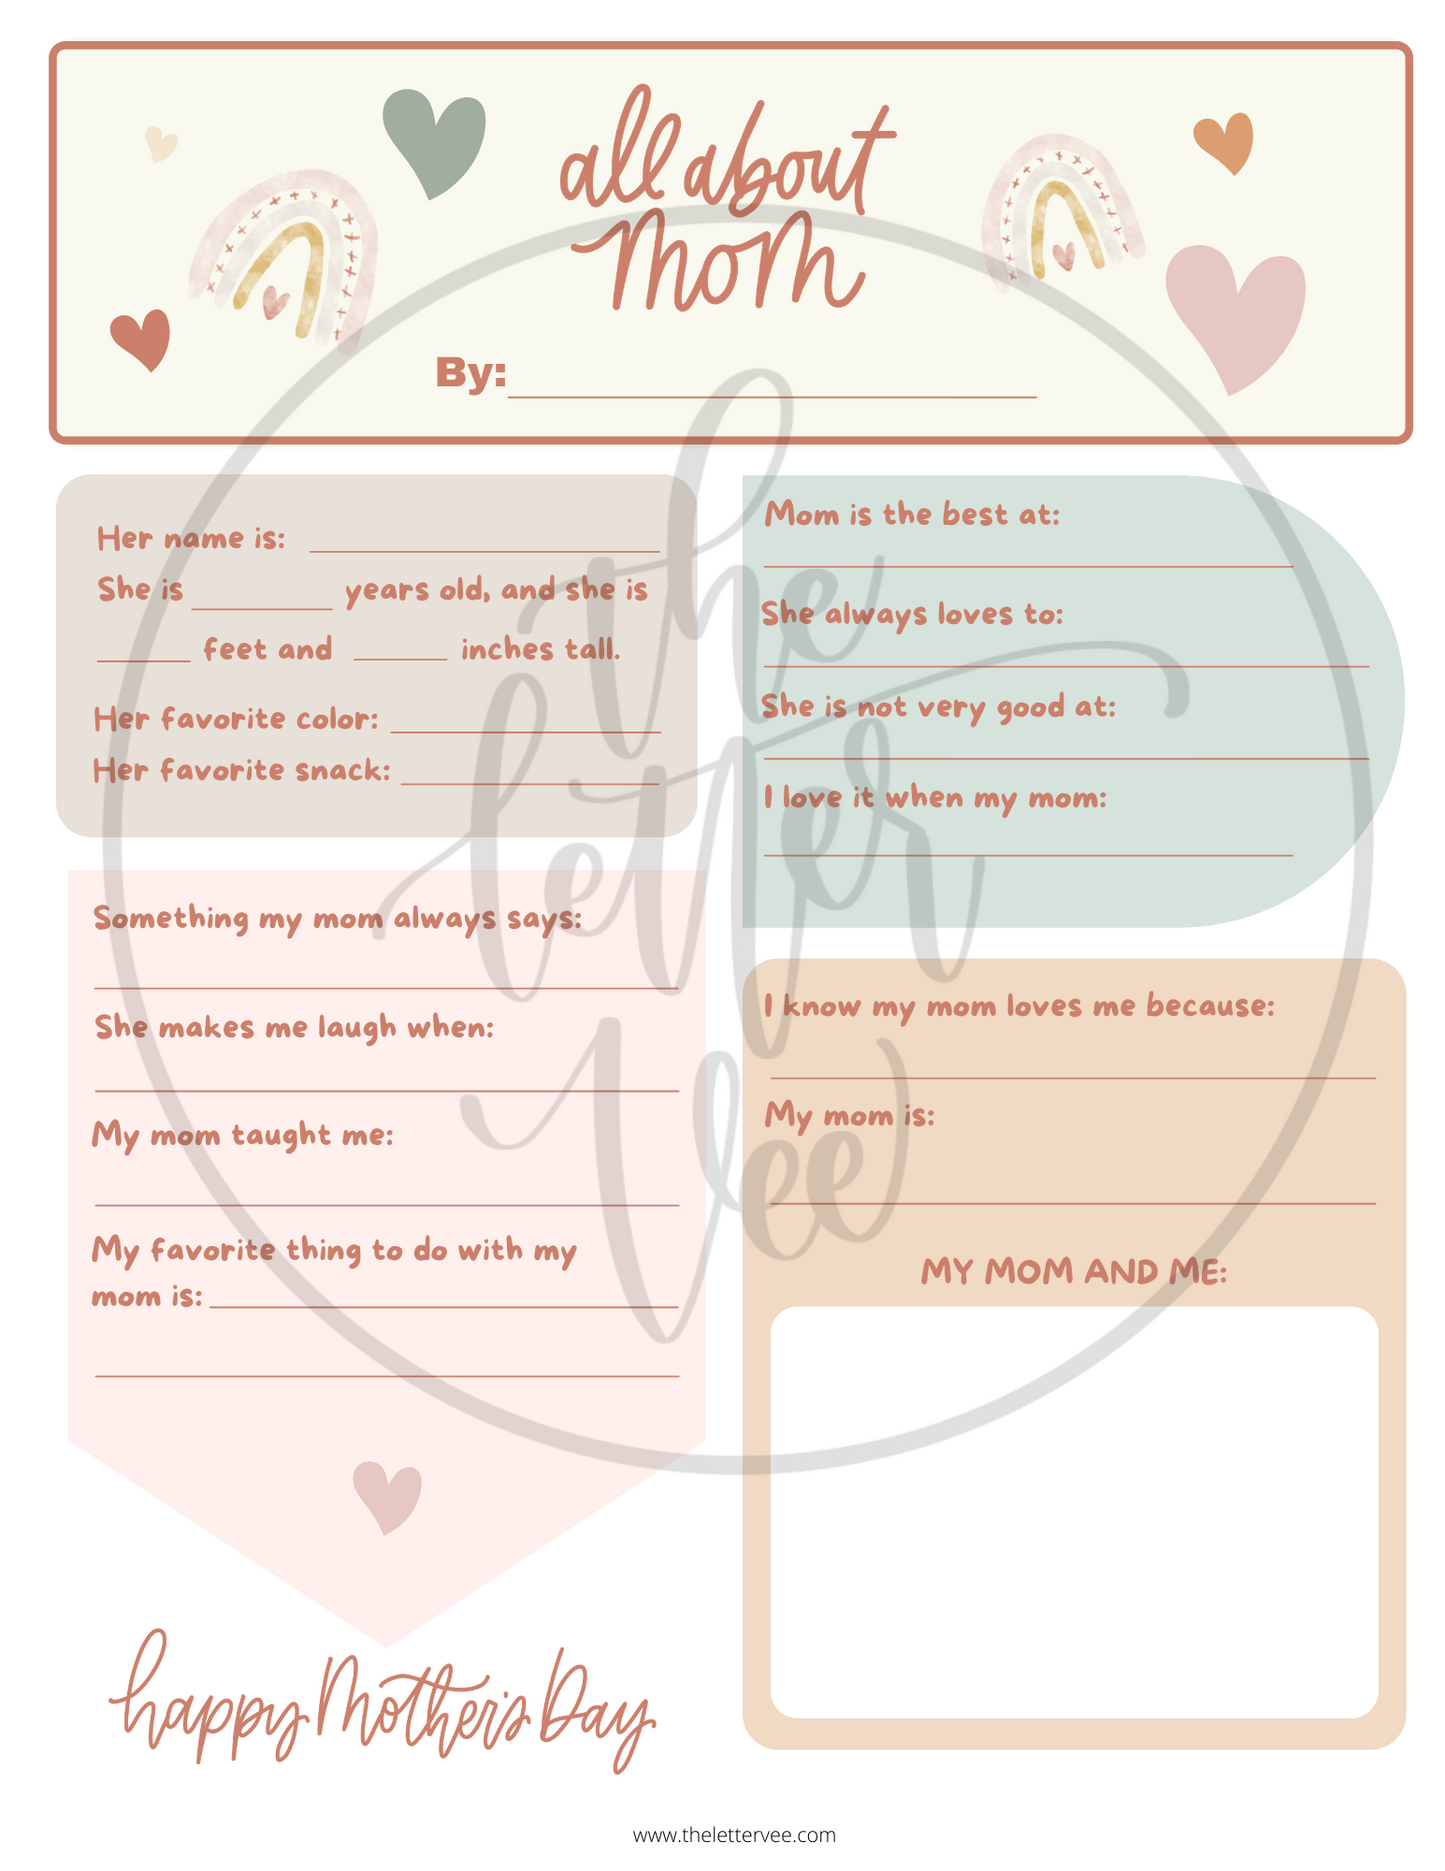 All About Mom | Mother's Day Printable